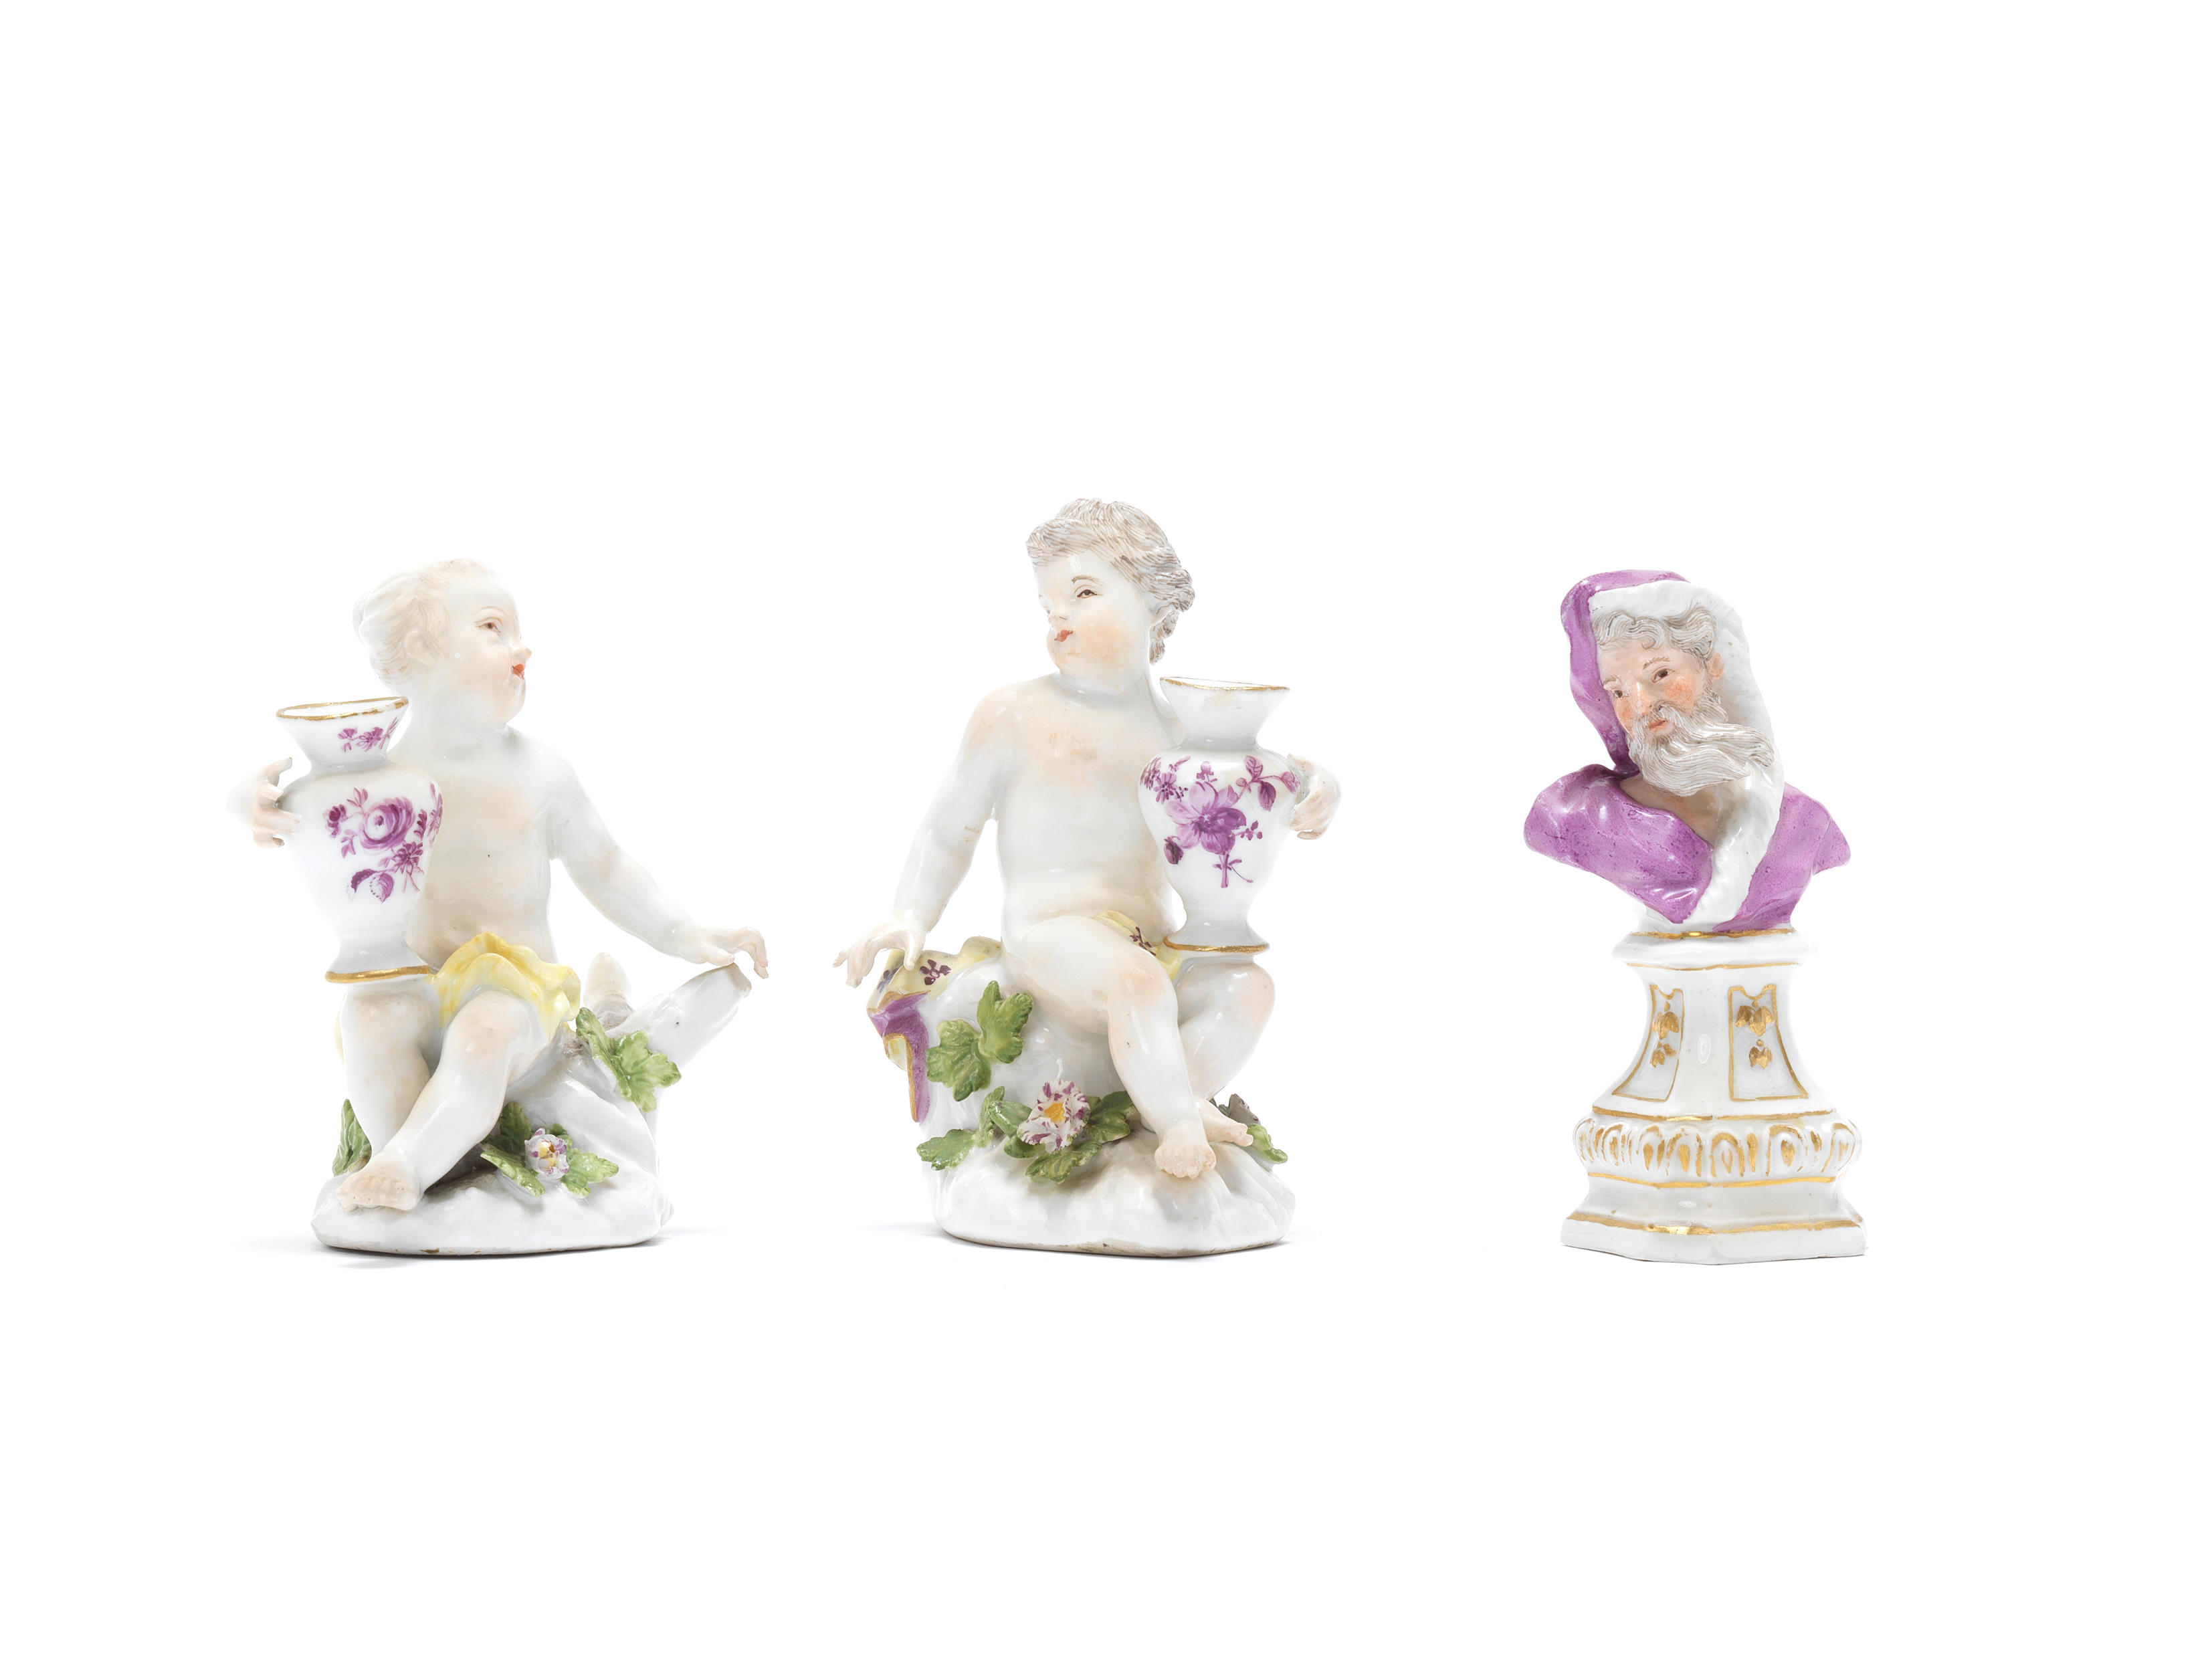 A pair of Meissen figures of putti with vases and a small bust, circa 1760